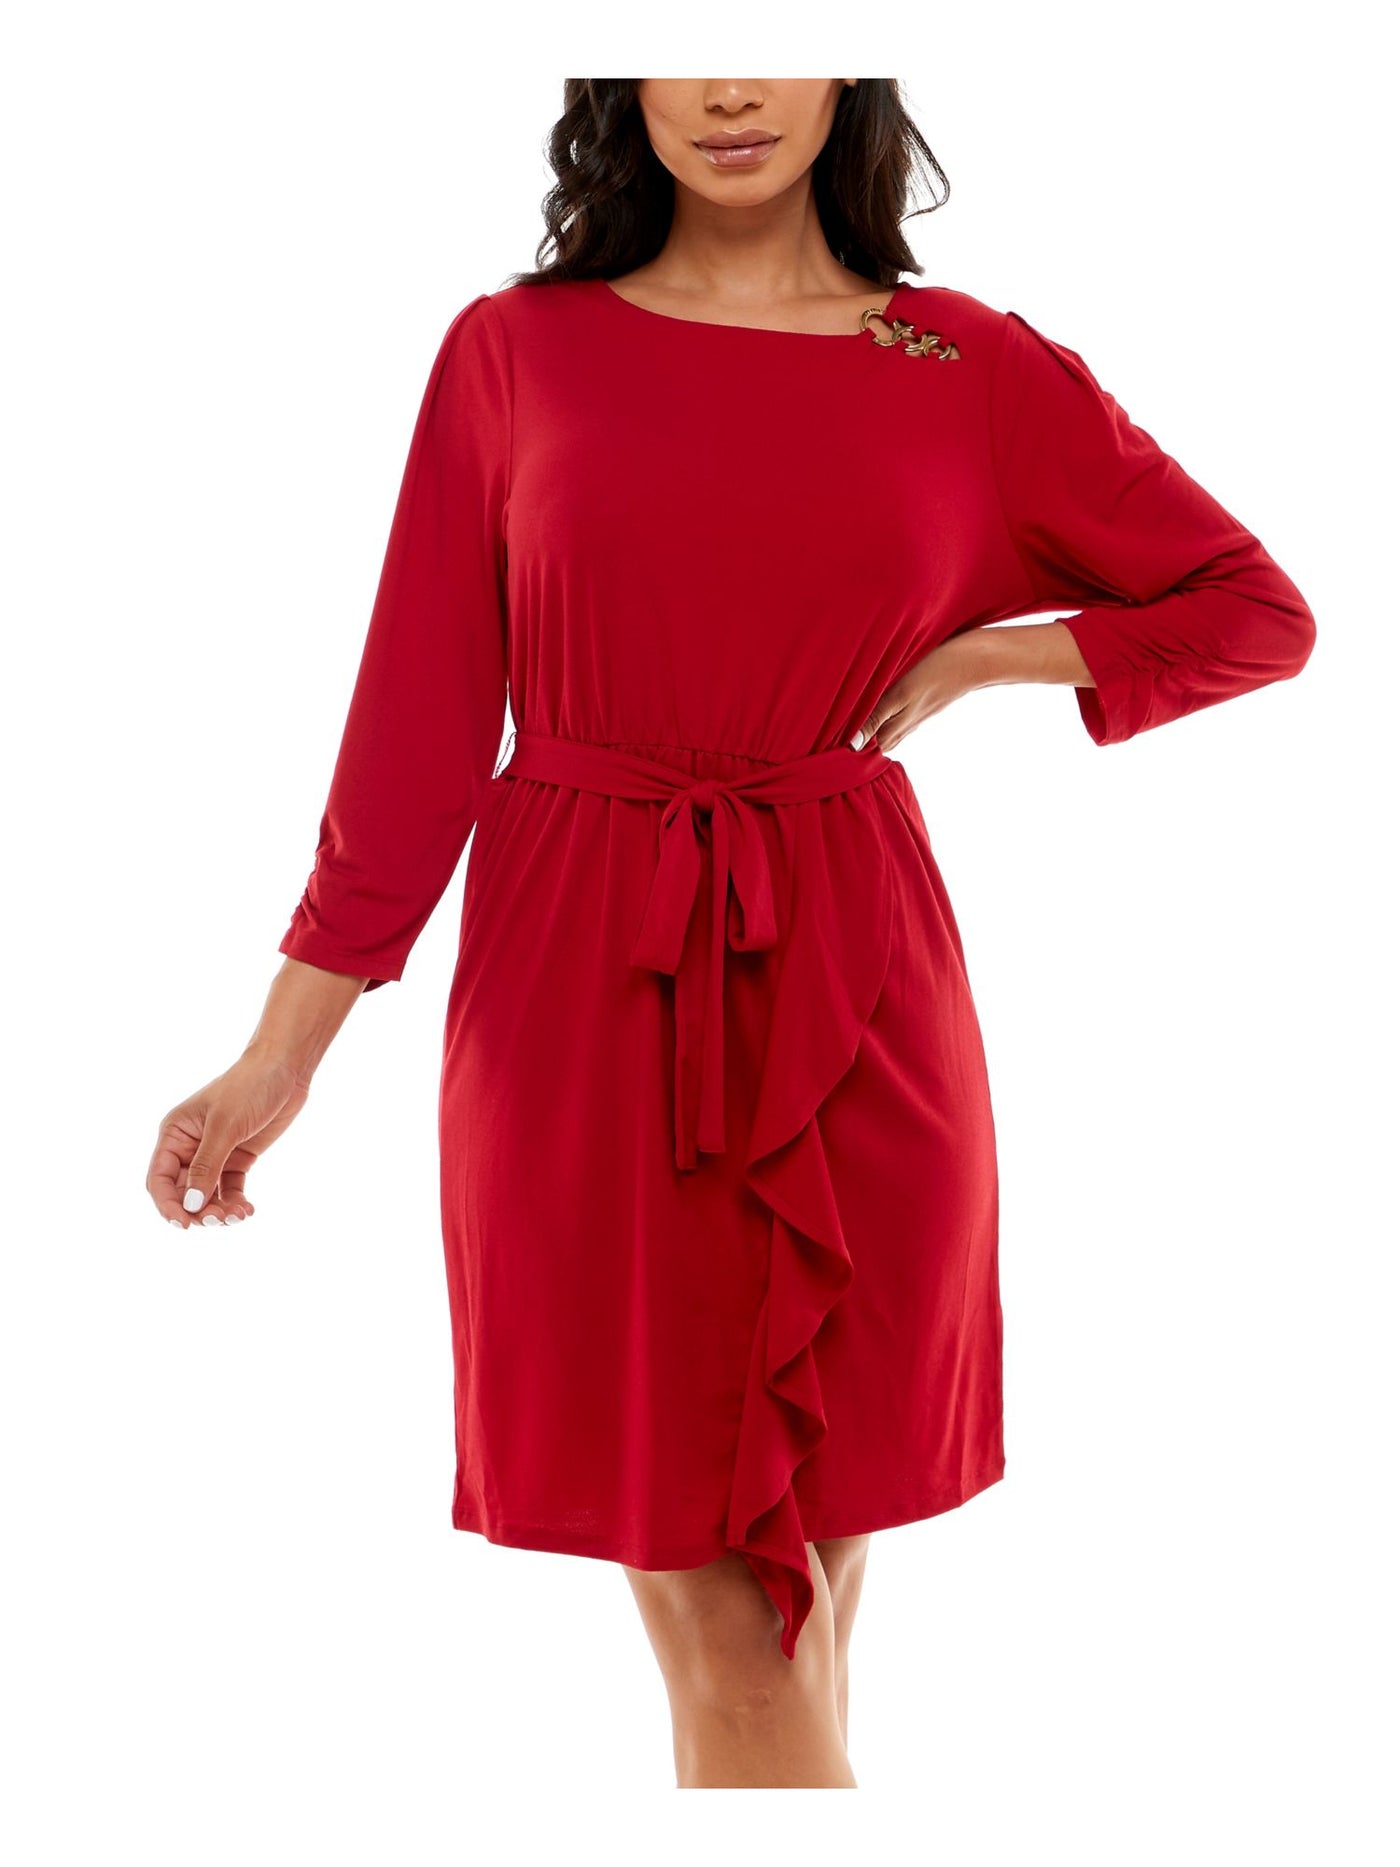 ADRIENNE VITTADINI Womens Red Stretch Tie 3/4 Sleeve Round Neck Above The Knee Cocktail Fit + Flare Dress S